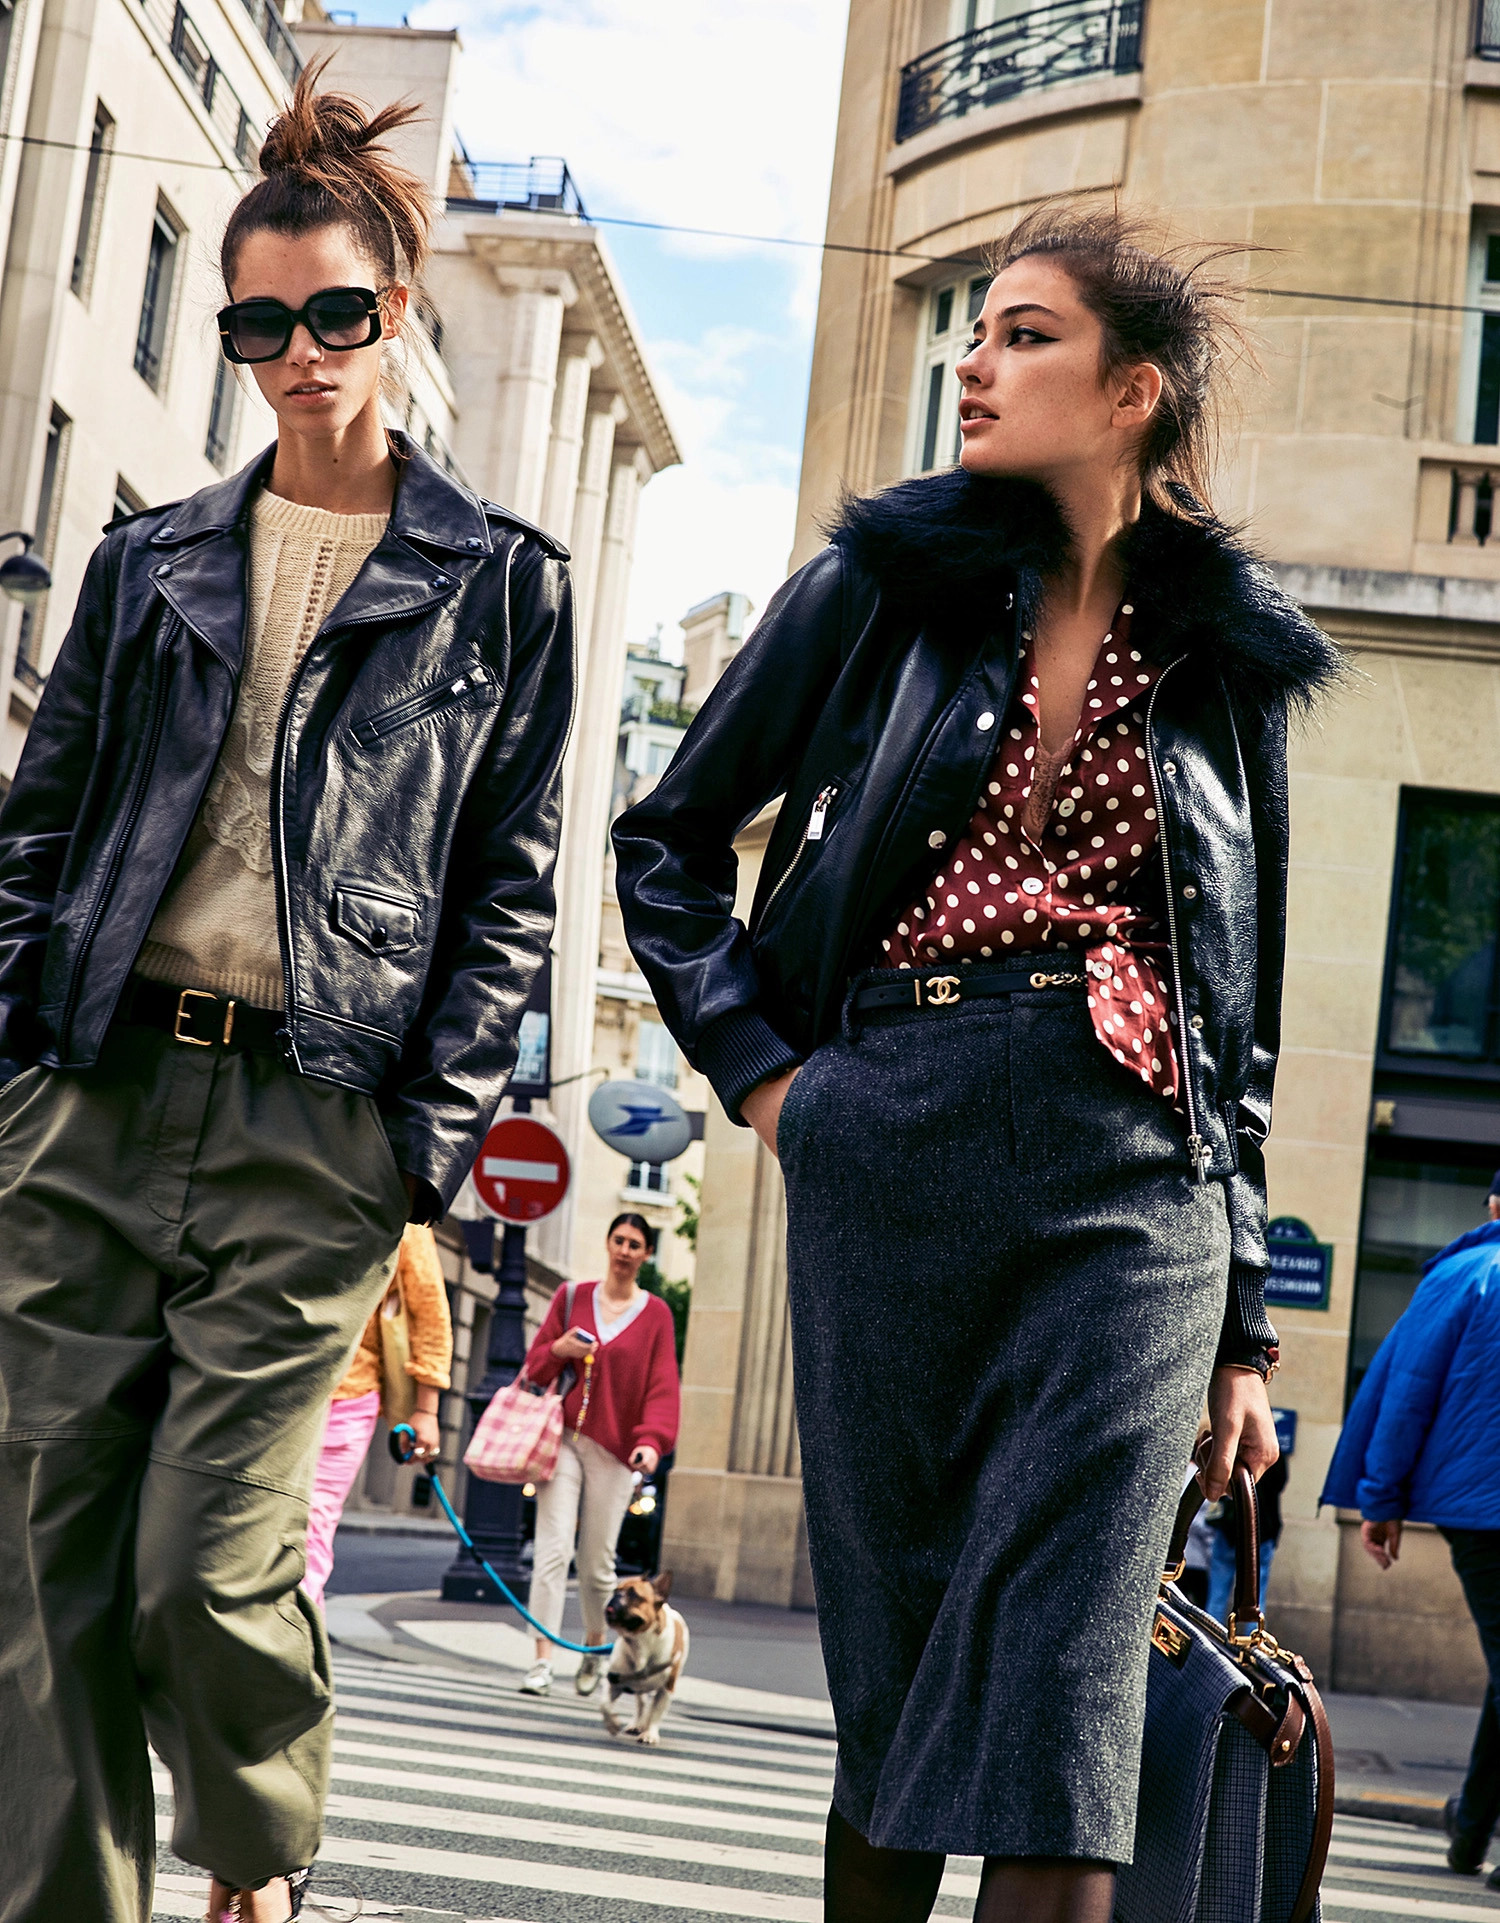 Pauline Hoarau and Blanca Soler by Grégory Derkenne for Madame Figaro September 2nd, 2022